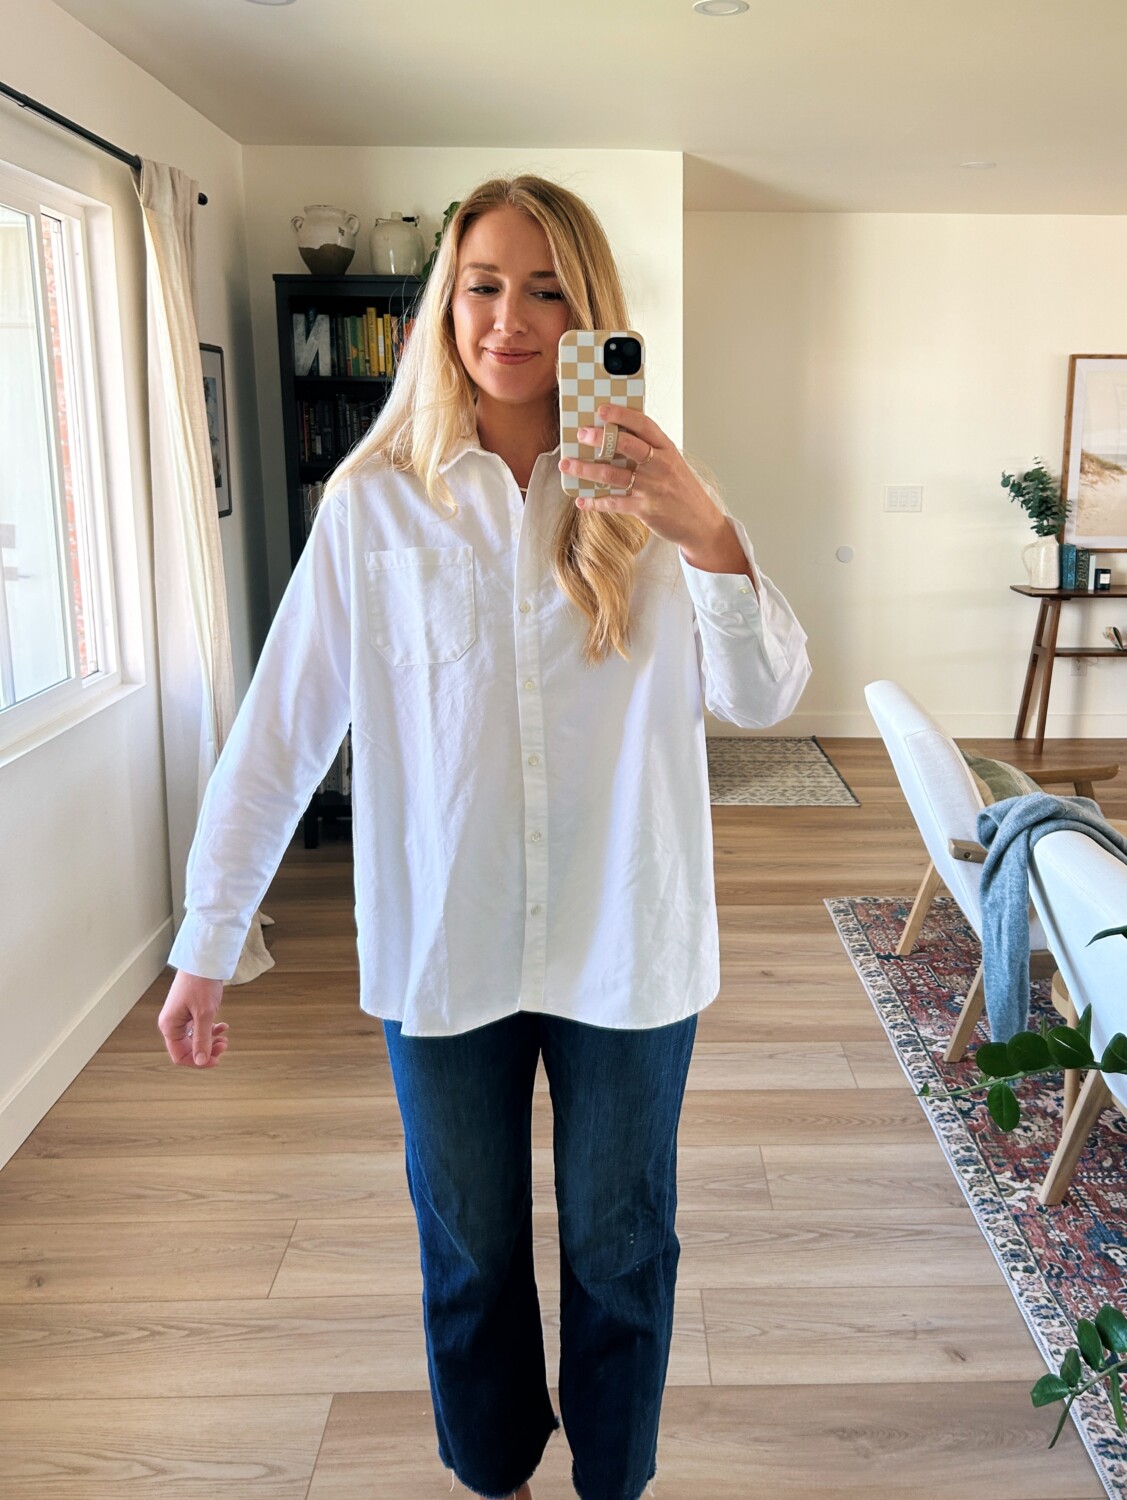 Ruth Nuss wearing white button down shirt and pants